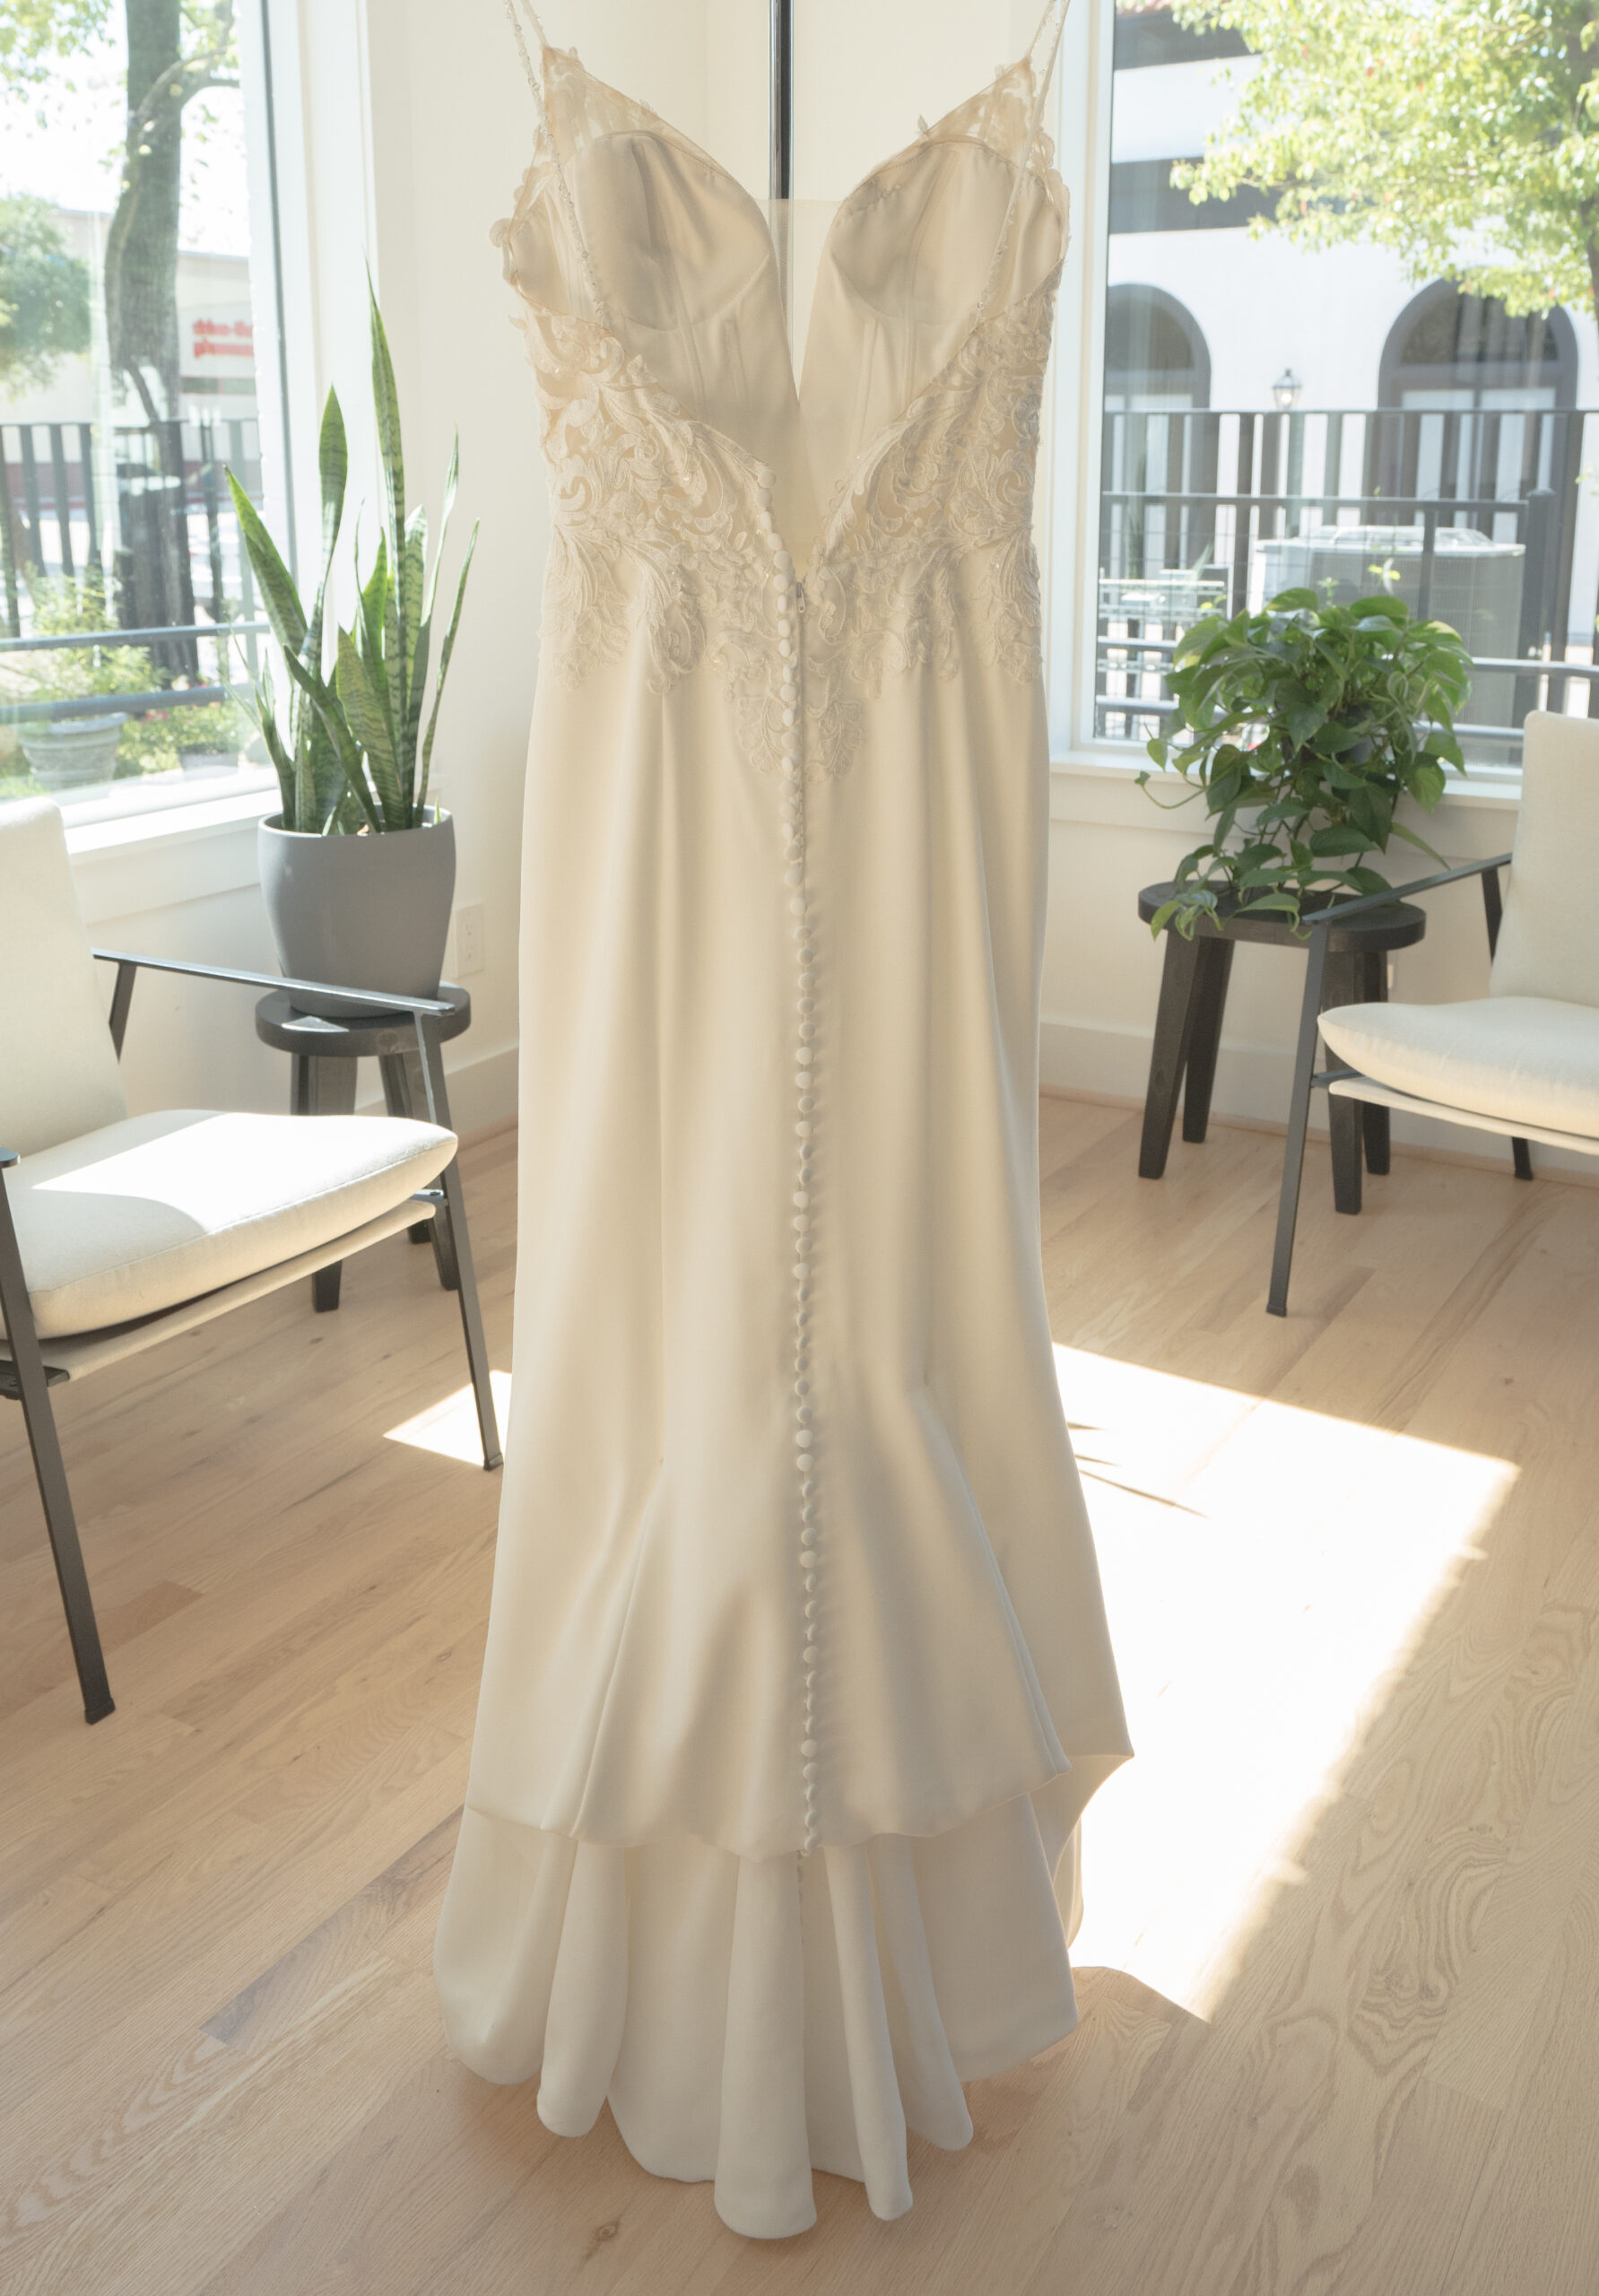 Bridal Alterations Guide: When to Start & What to Expect - Memorial Tailors